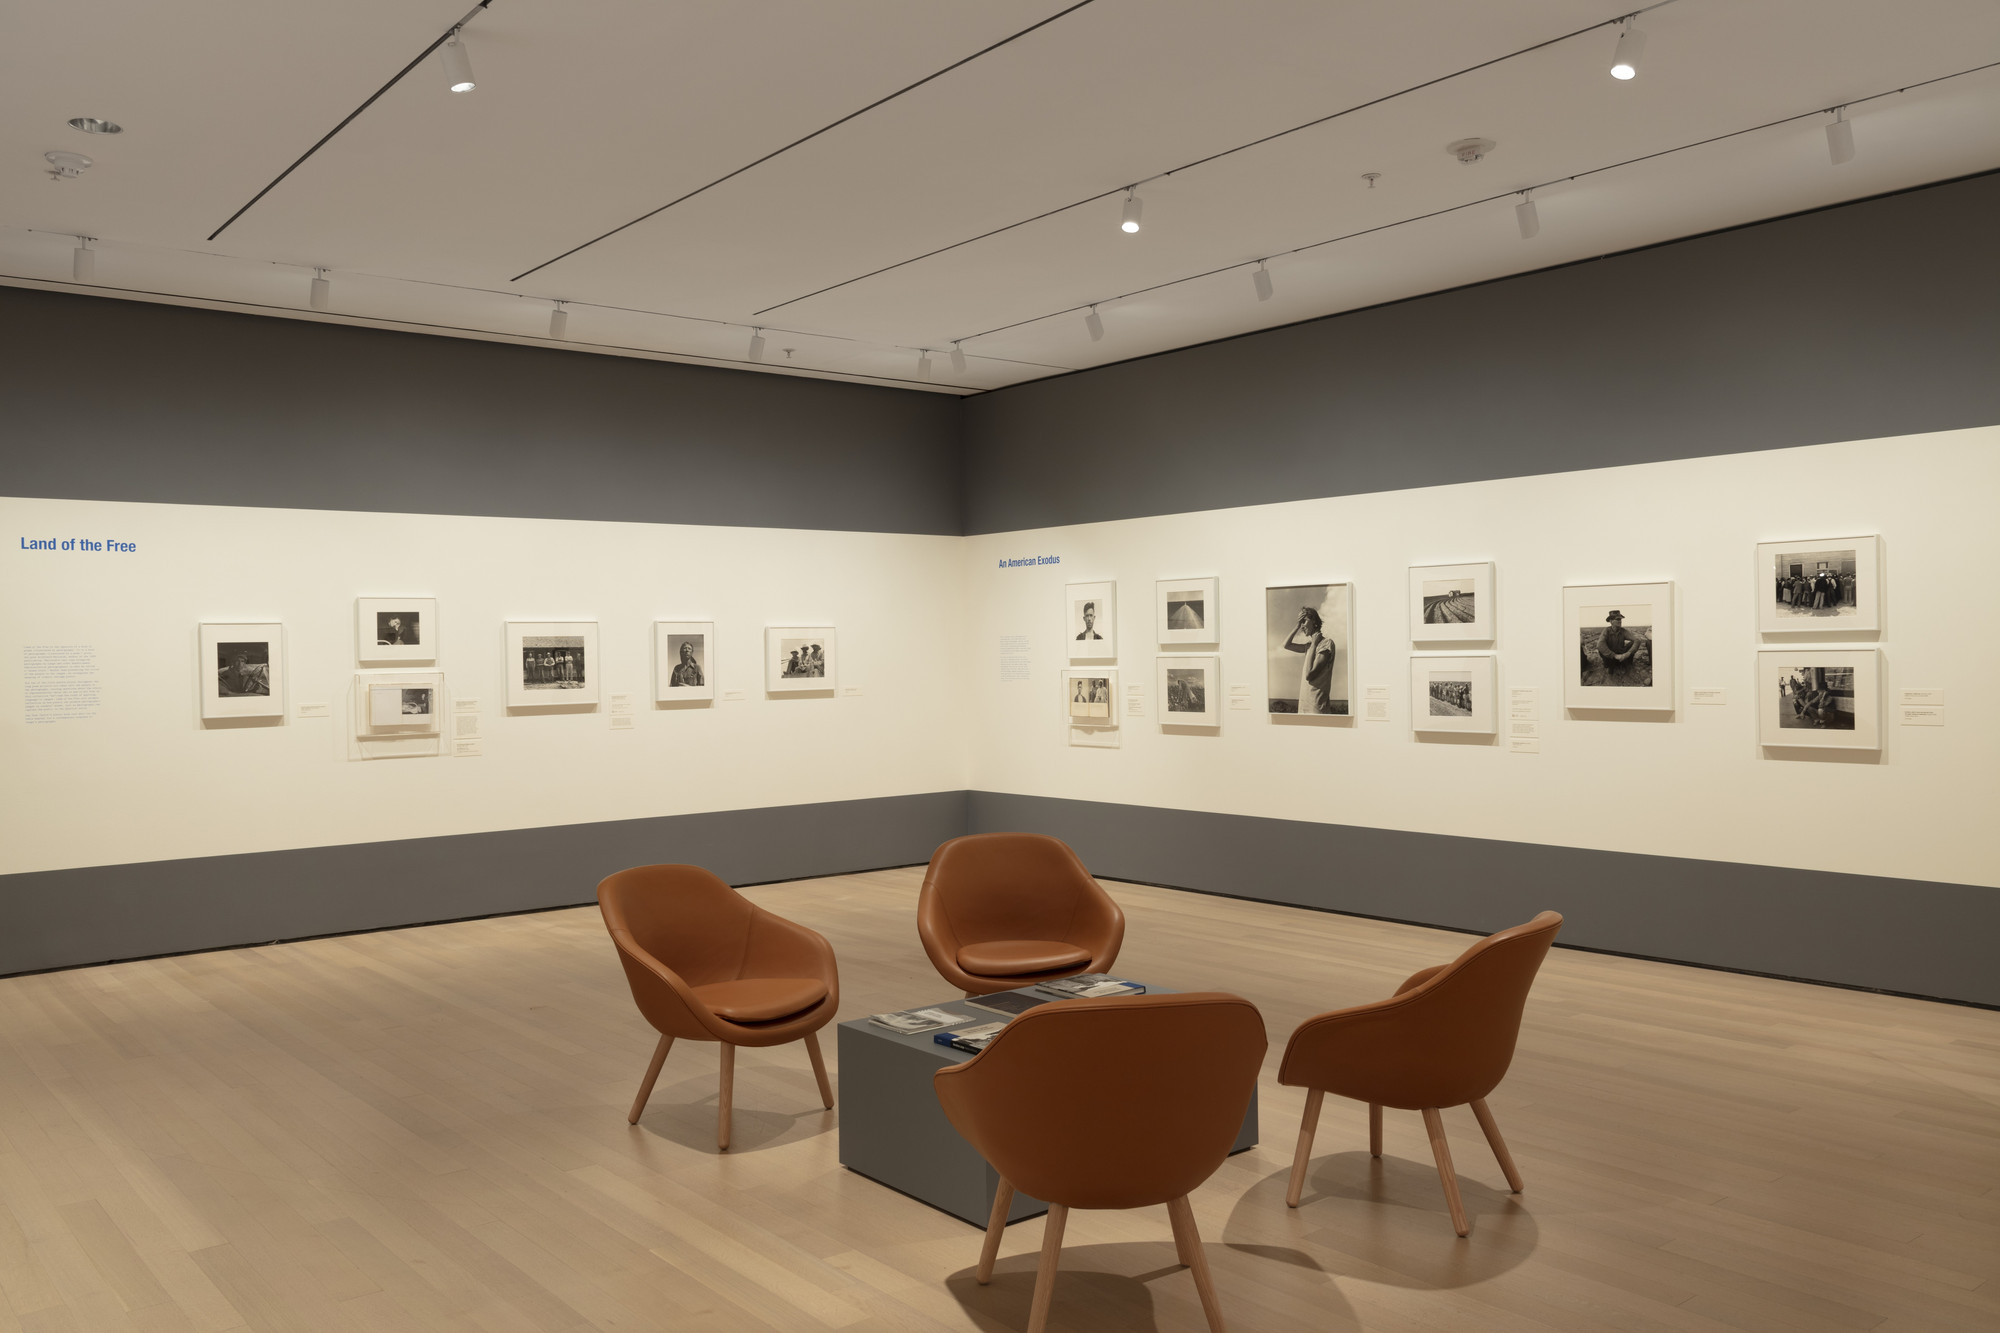 Installation view of the exhibition "Dorothea Lange Words & Pictures